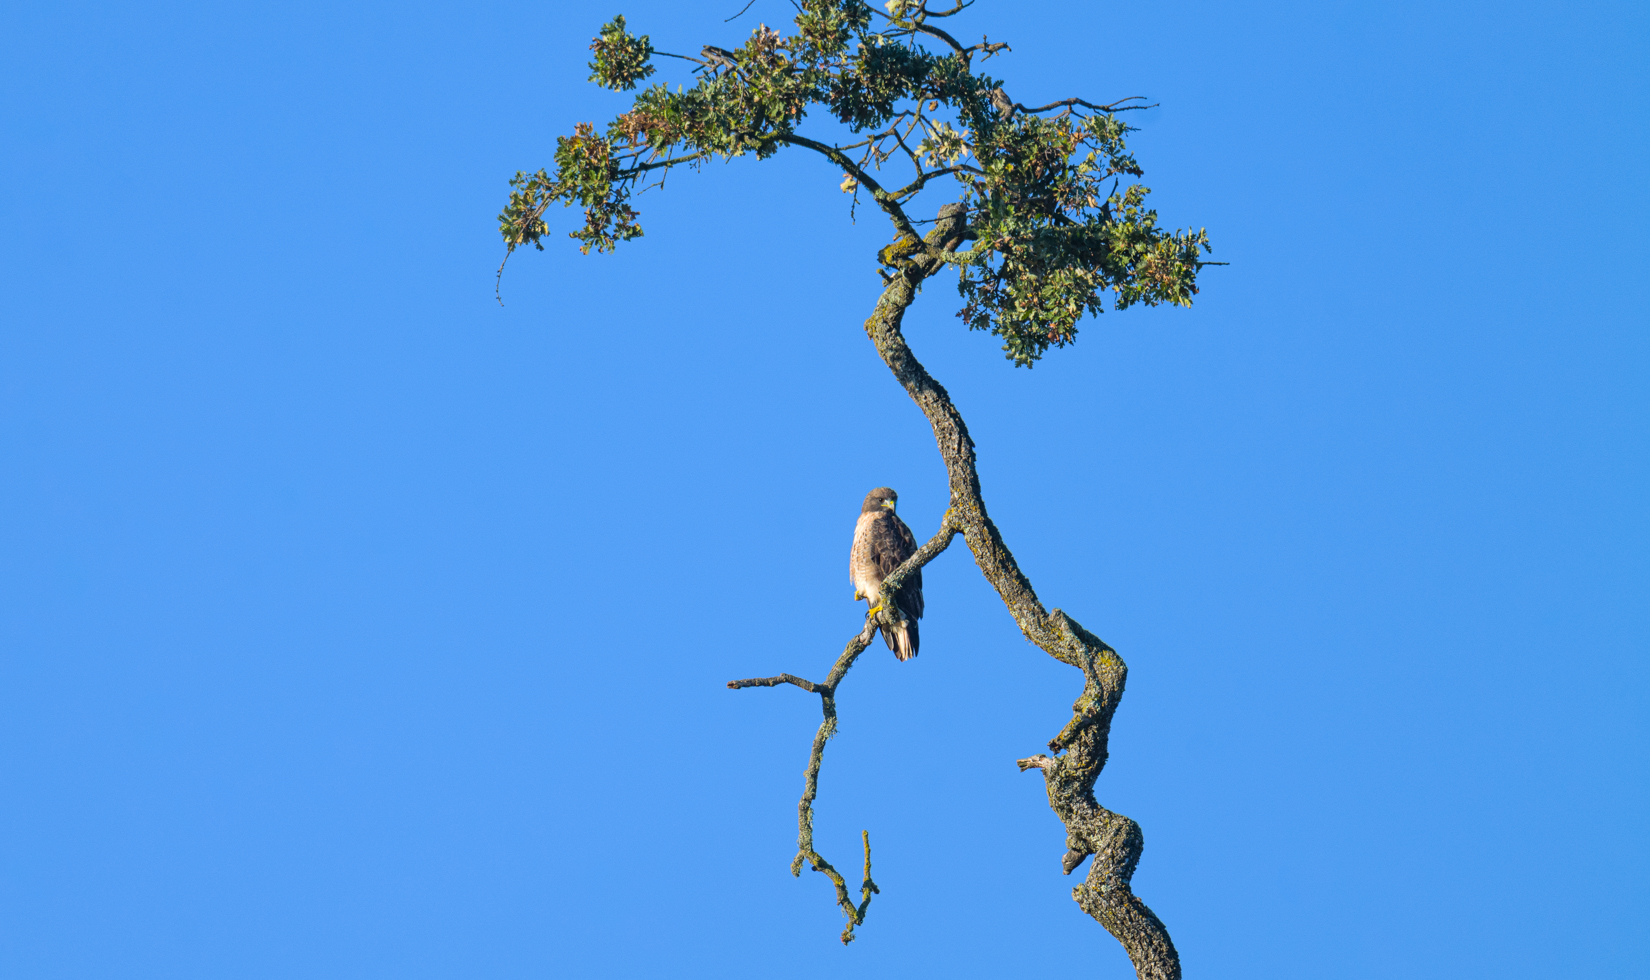 A Red-Tailed Hawk rests on oak tree branch.